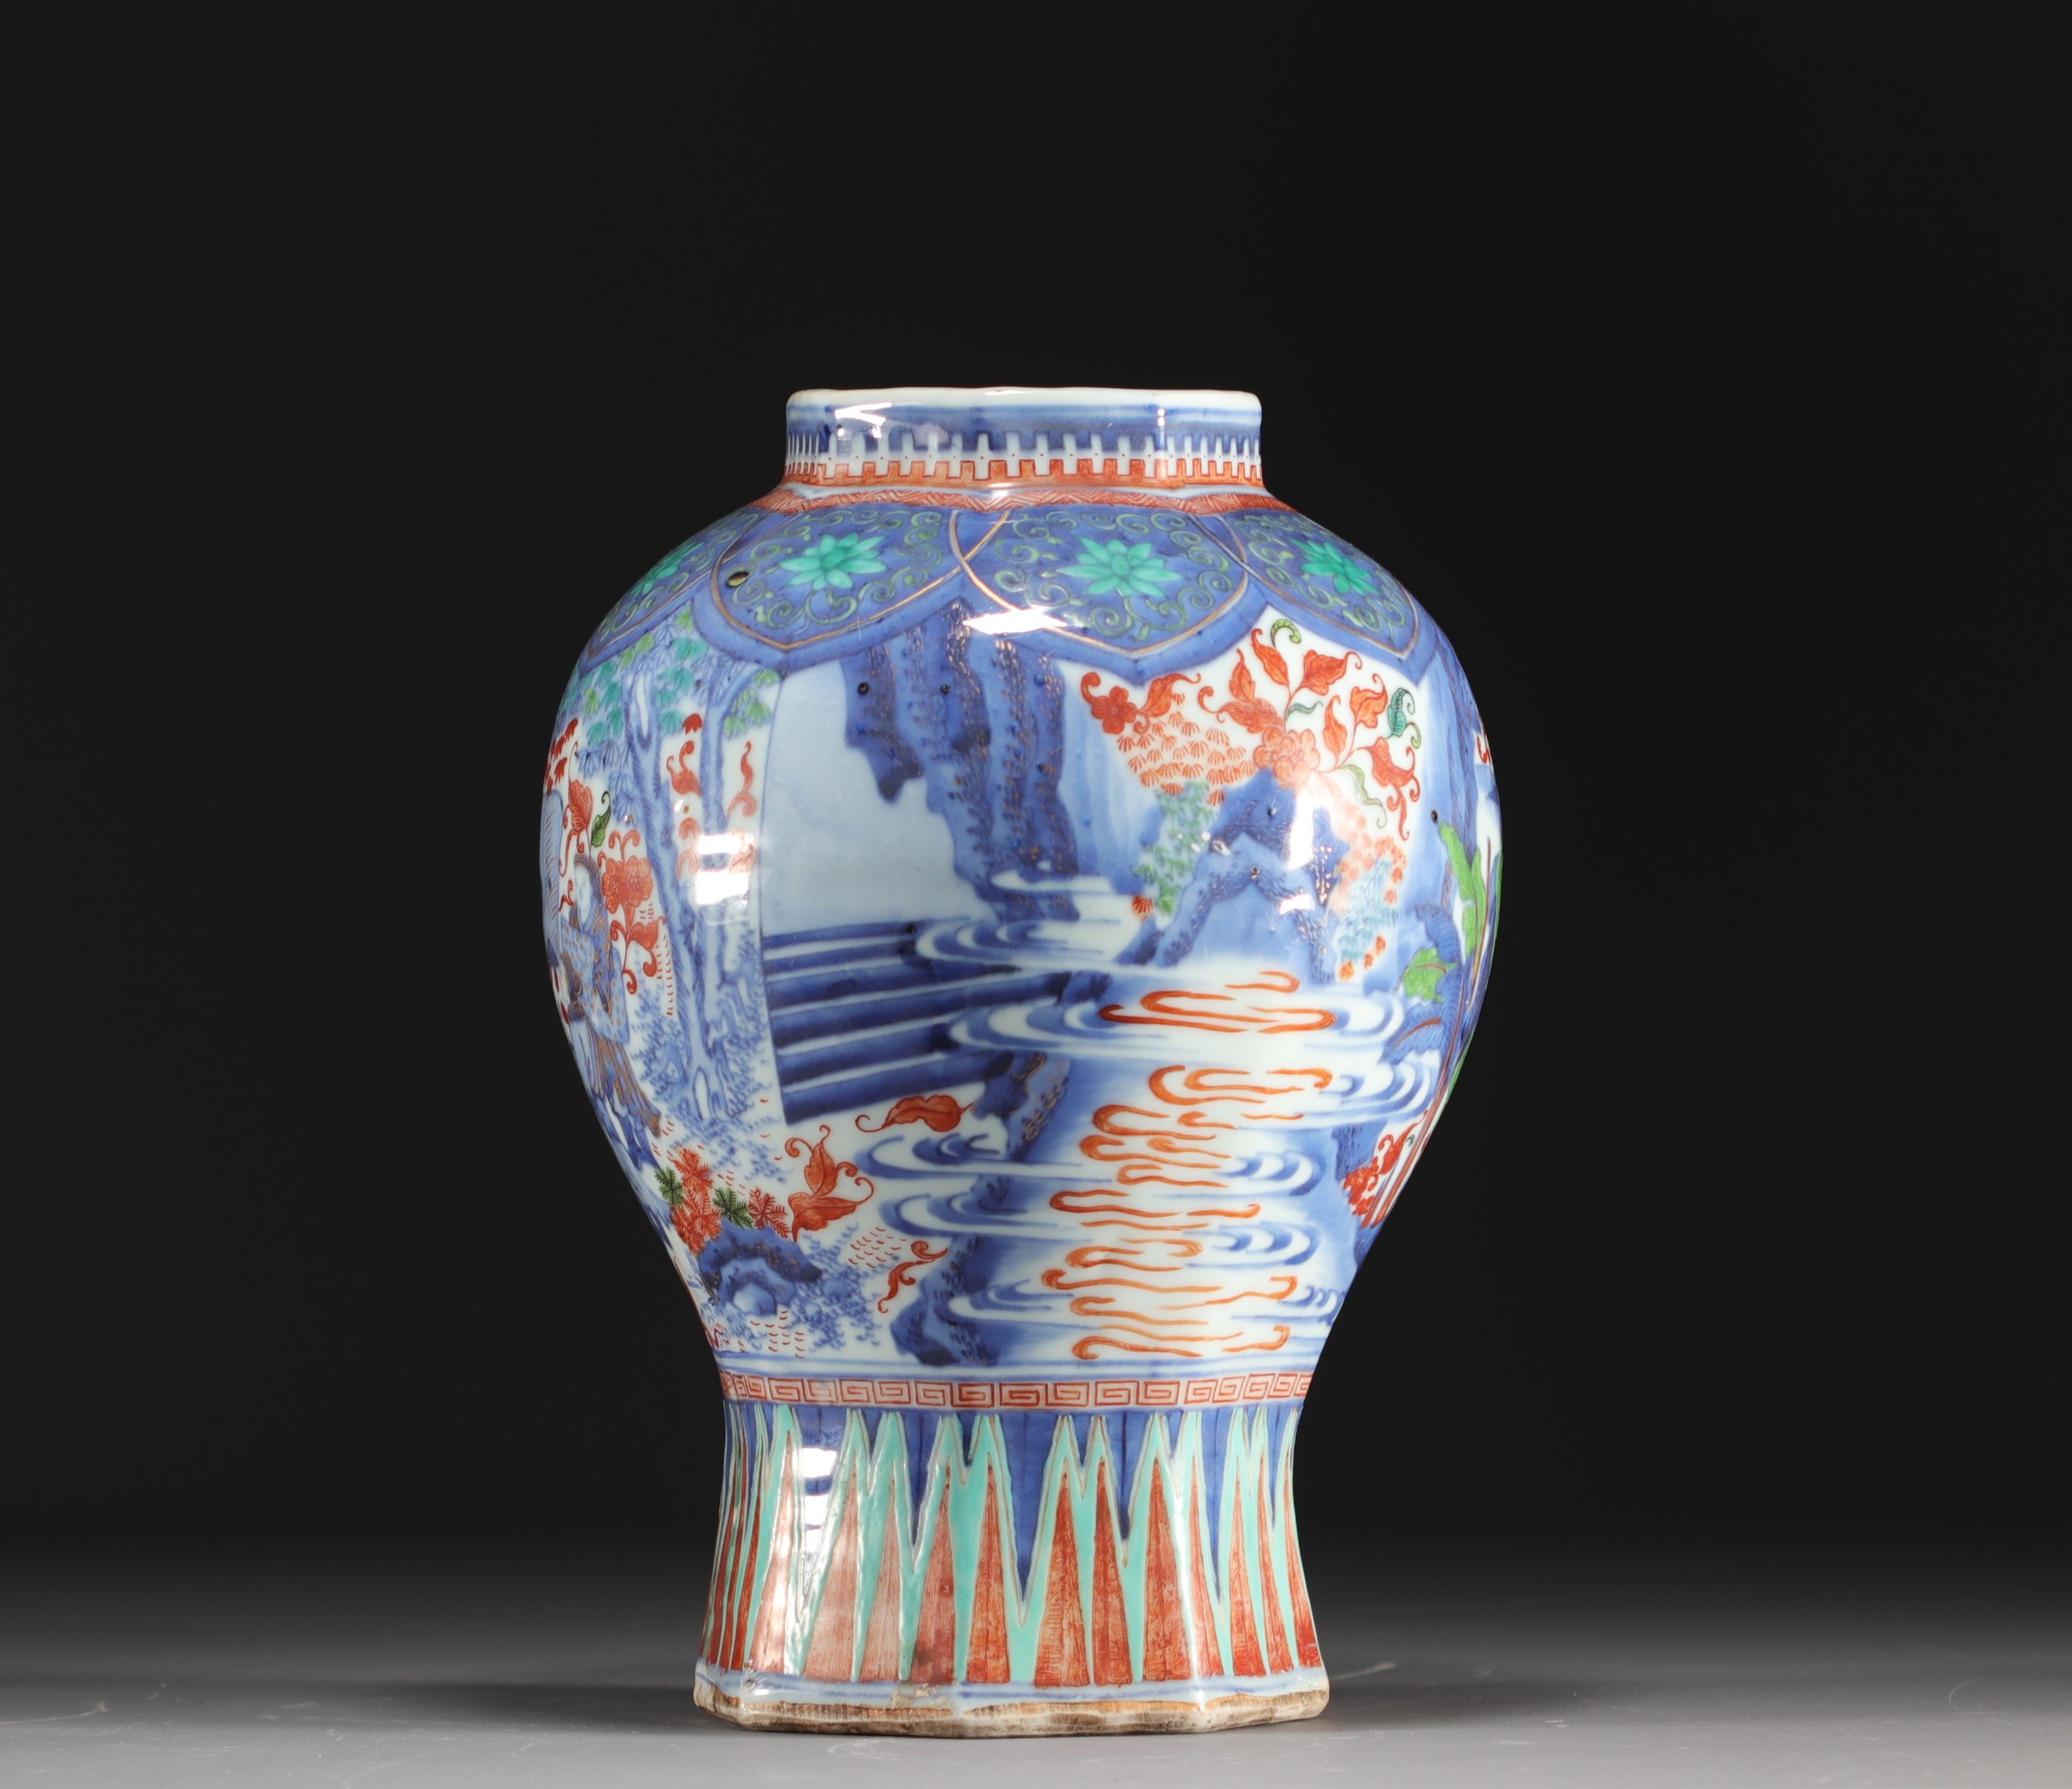 China - Polychrome porcelain vase decorated with figures and landscape, transition period. - Image 2 of 7